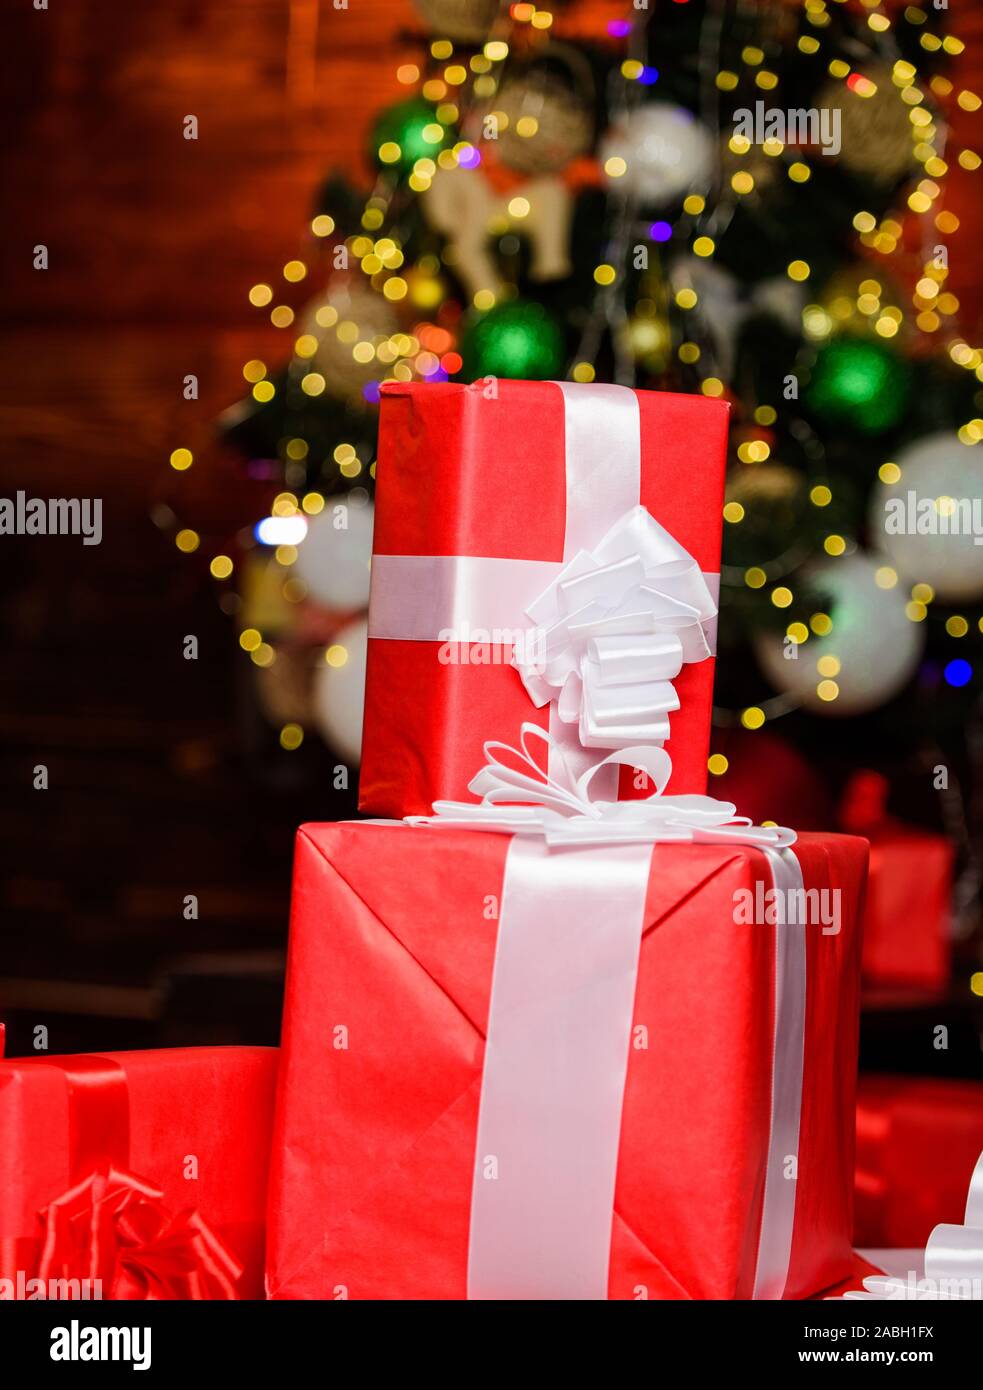 Christmas online shopping. present boxes at christmas tree. happy new year. celebrate xmas at home. winter holiday shopping. shopping sales. gift delivery. surprise from santa. Stock Photo